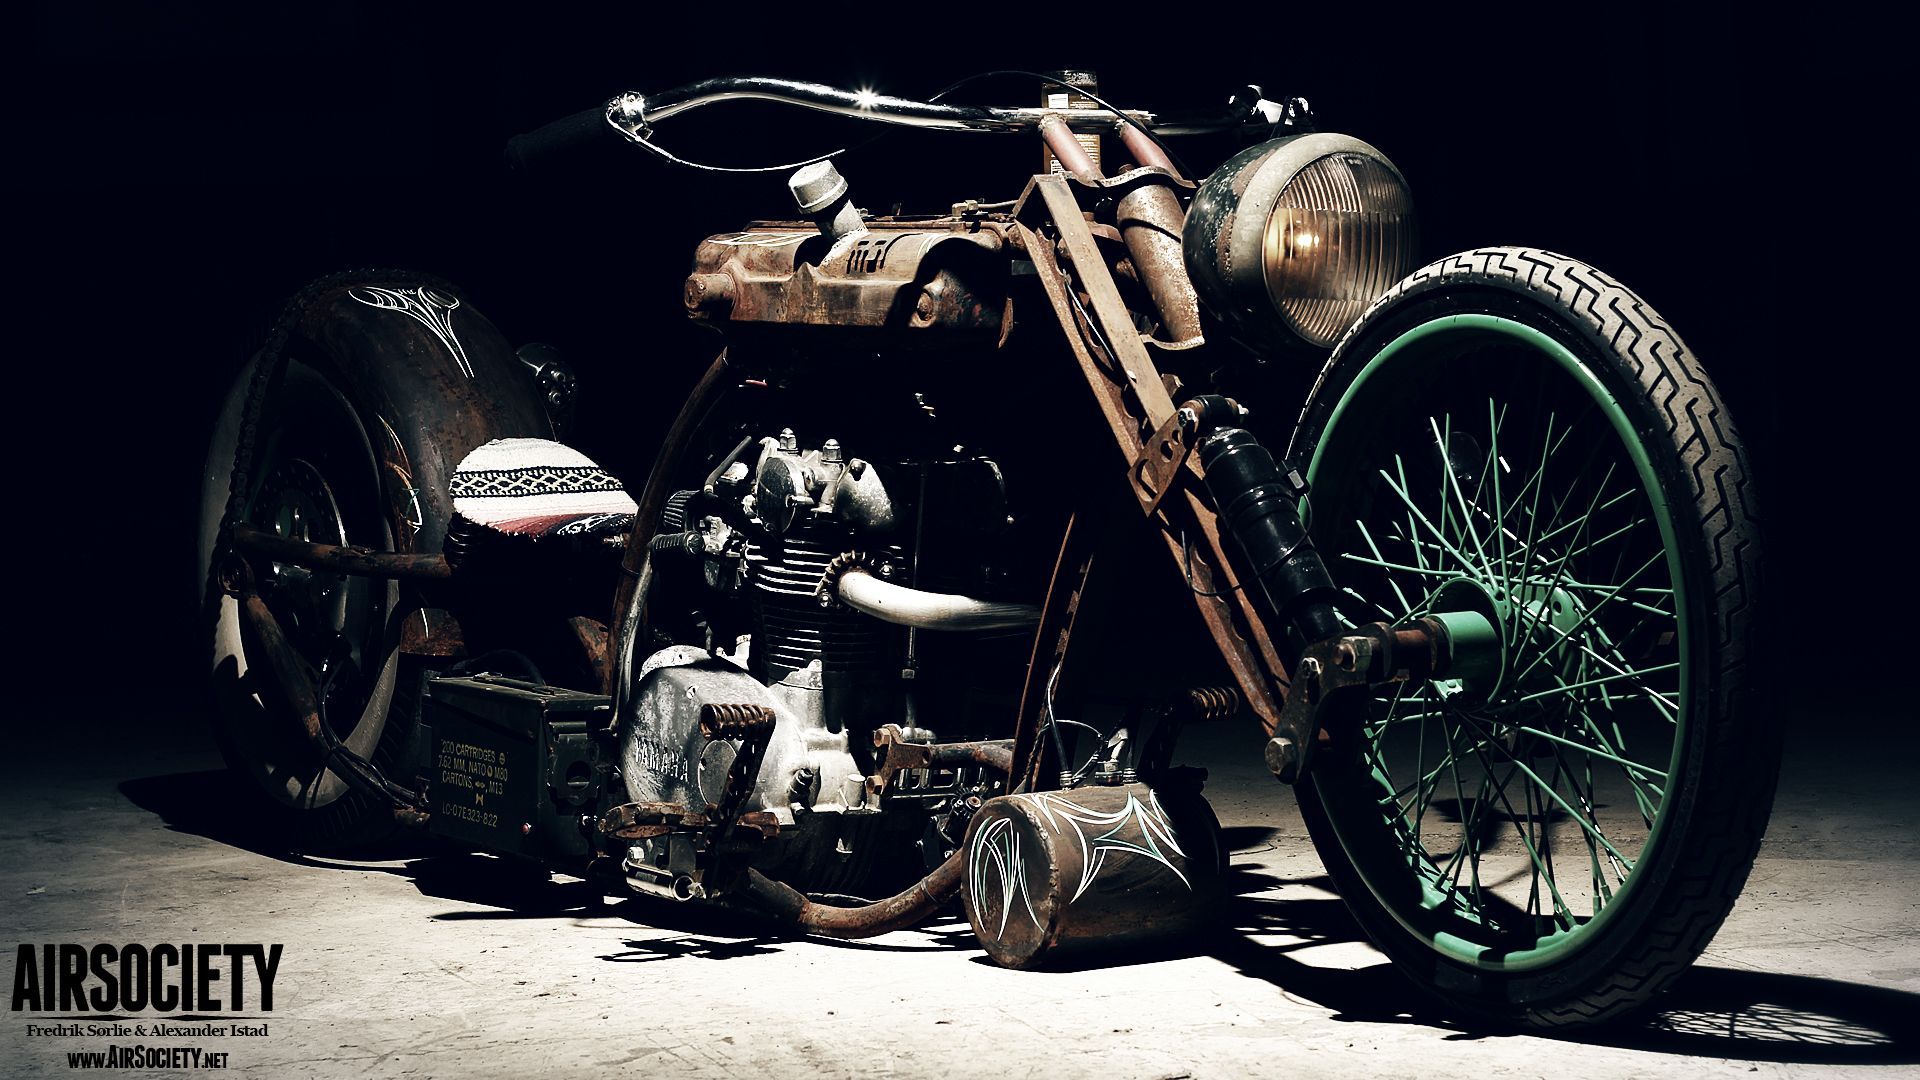 Old Motorcycle Computer Wallpaper Free Old Motorcycle